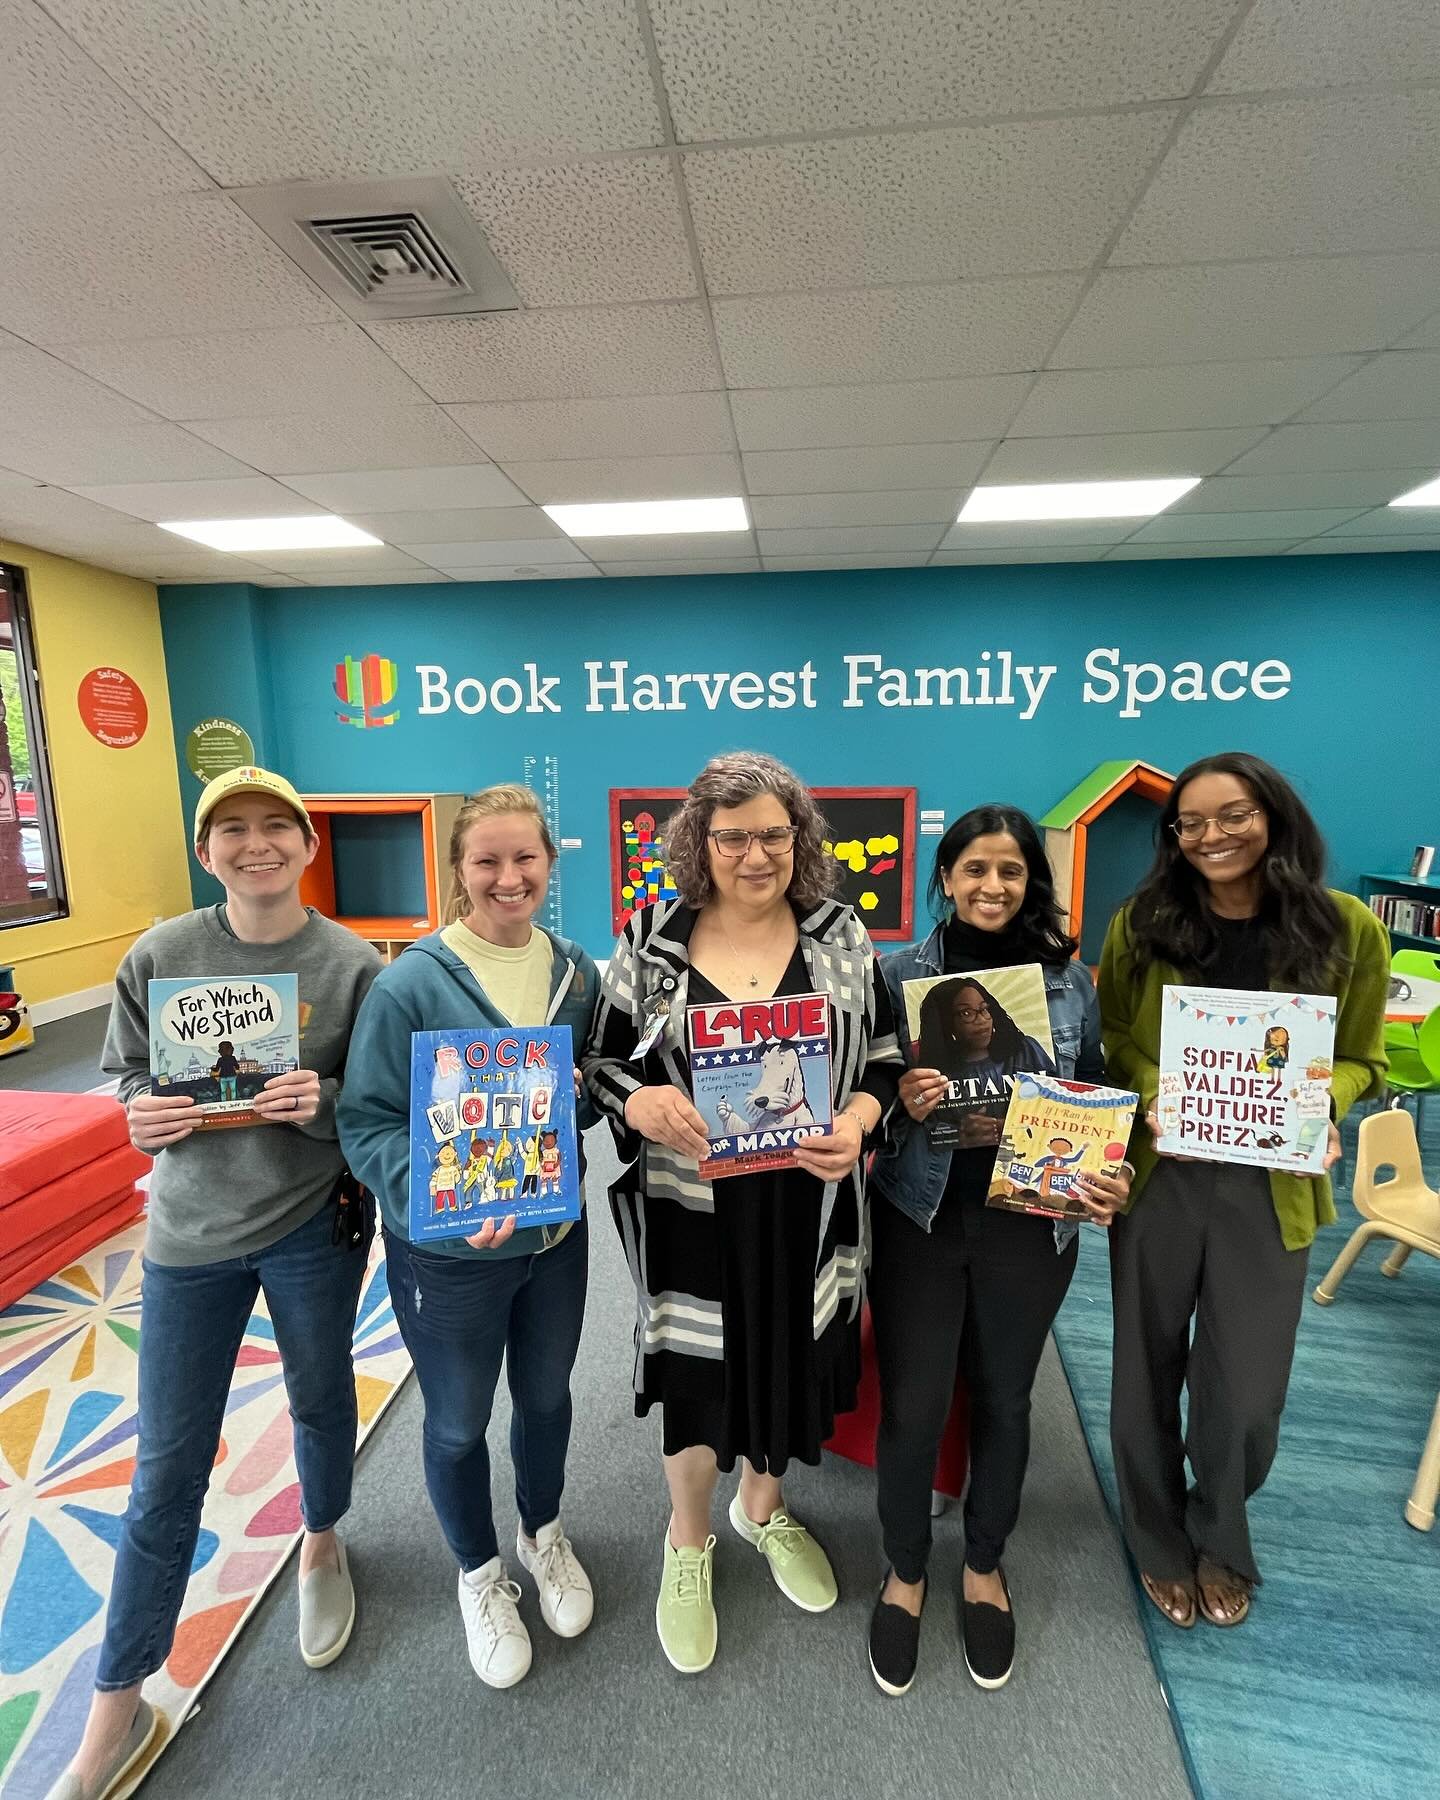 Civic engagement and literacy go hand in hand, and we are so grateful to our friends at @bookharvestnc for make some fabulous books about voting and elections available for the youth and families we work with!  These folks are all civic superstars!  